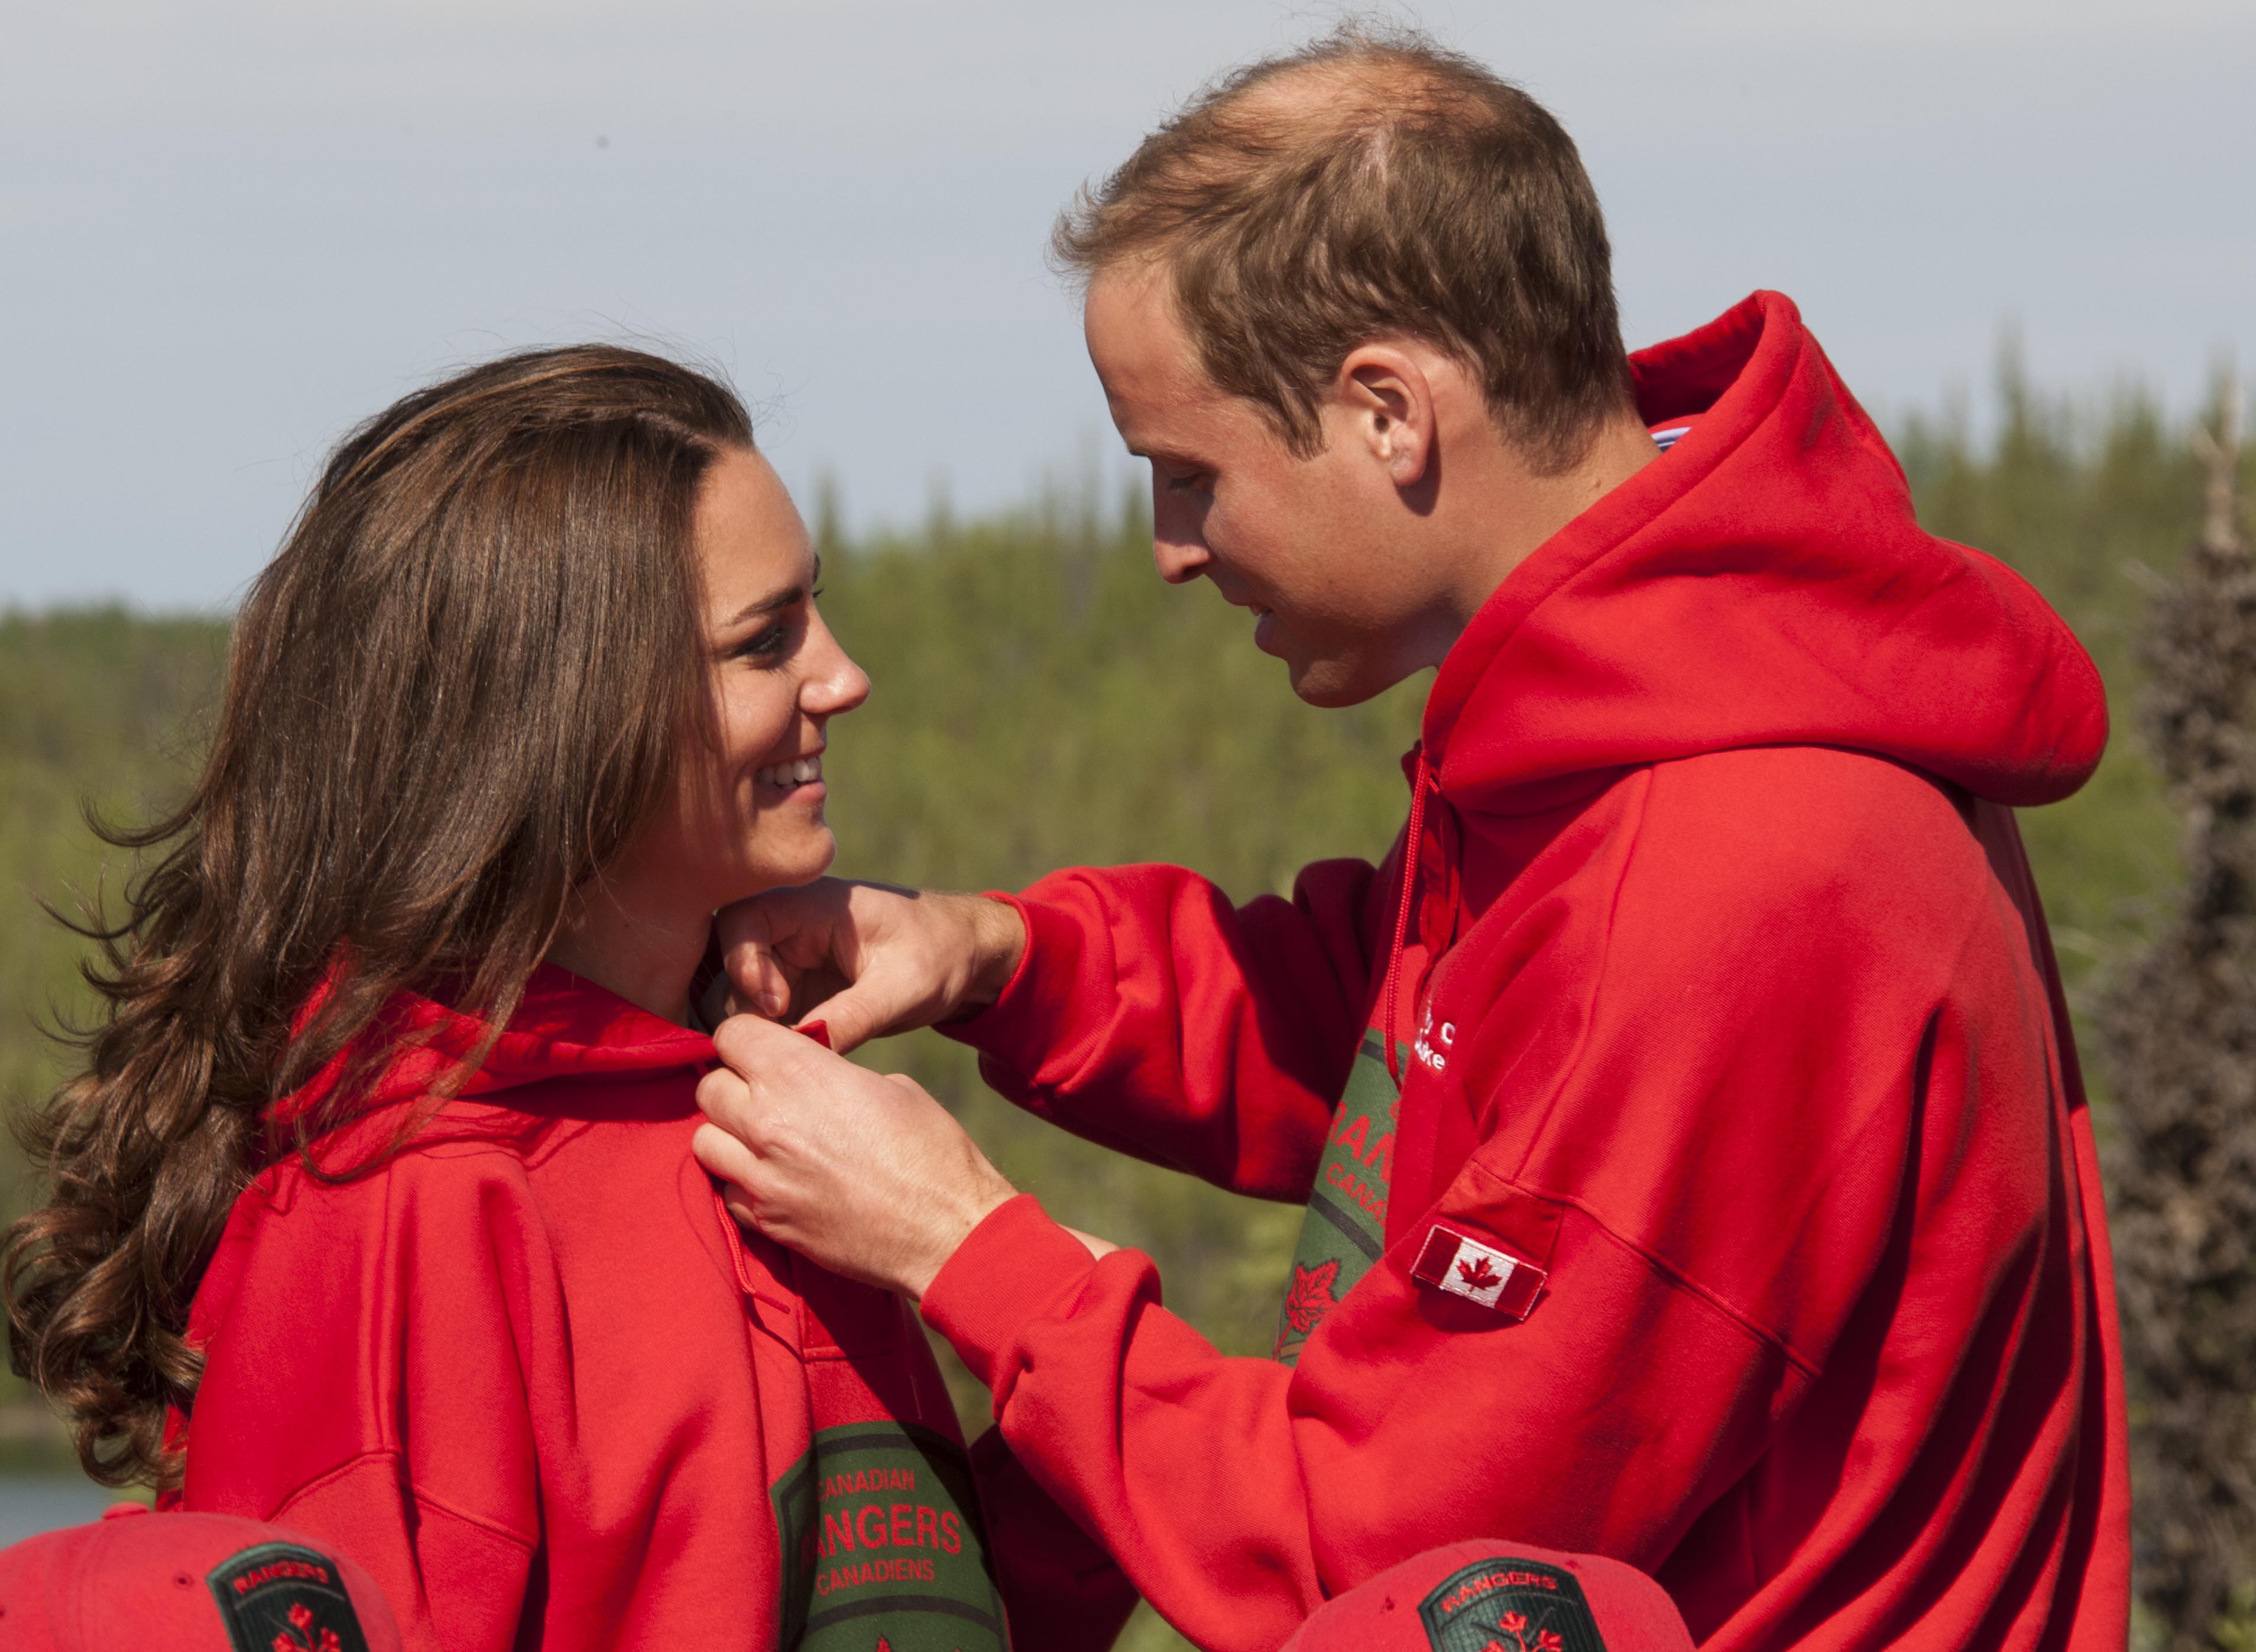 Prince WIlliam Kate Middleton jackets getty